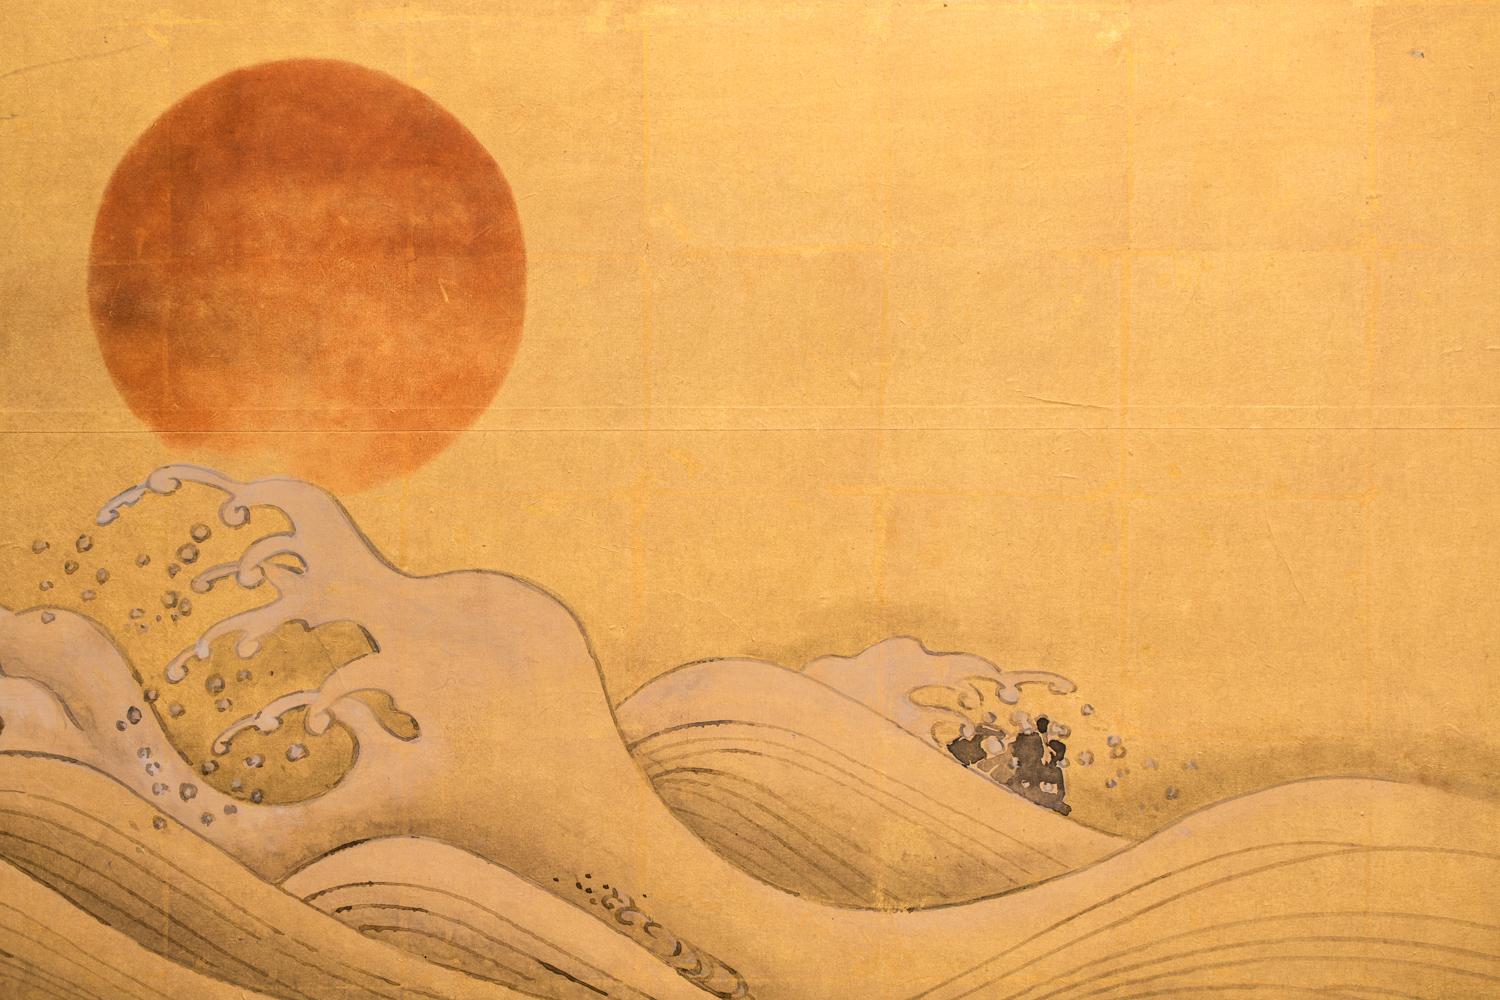 Meiji period (1868 - 1912) painting of Hokusai-style waves with a setting sun.  Painted with mineral pigments on gold leaf with a silk brocade border.